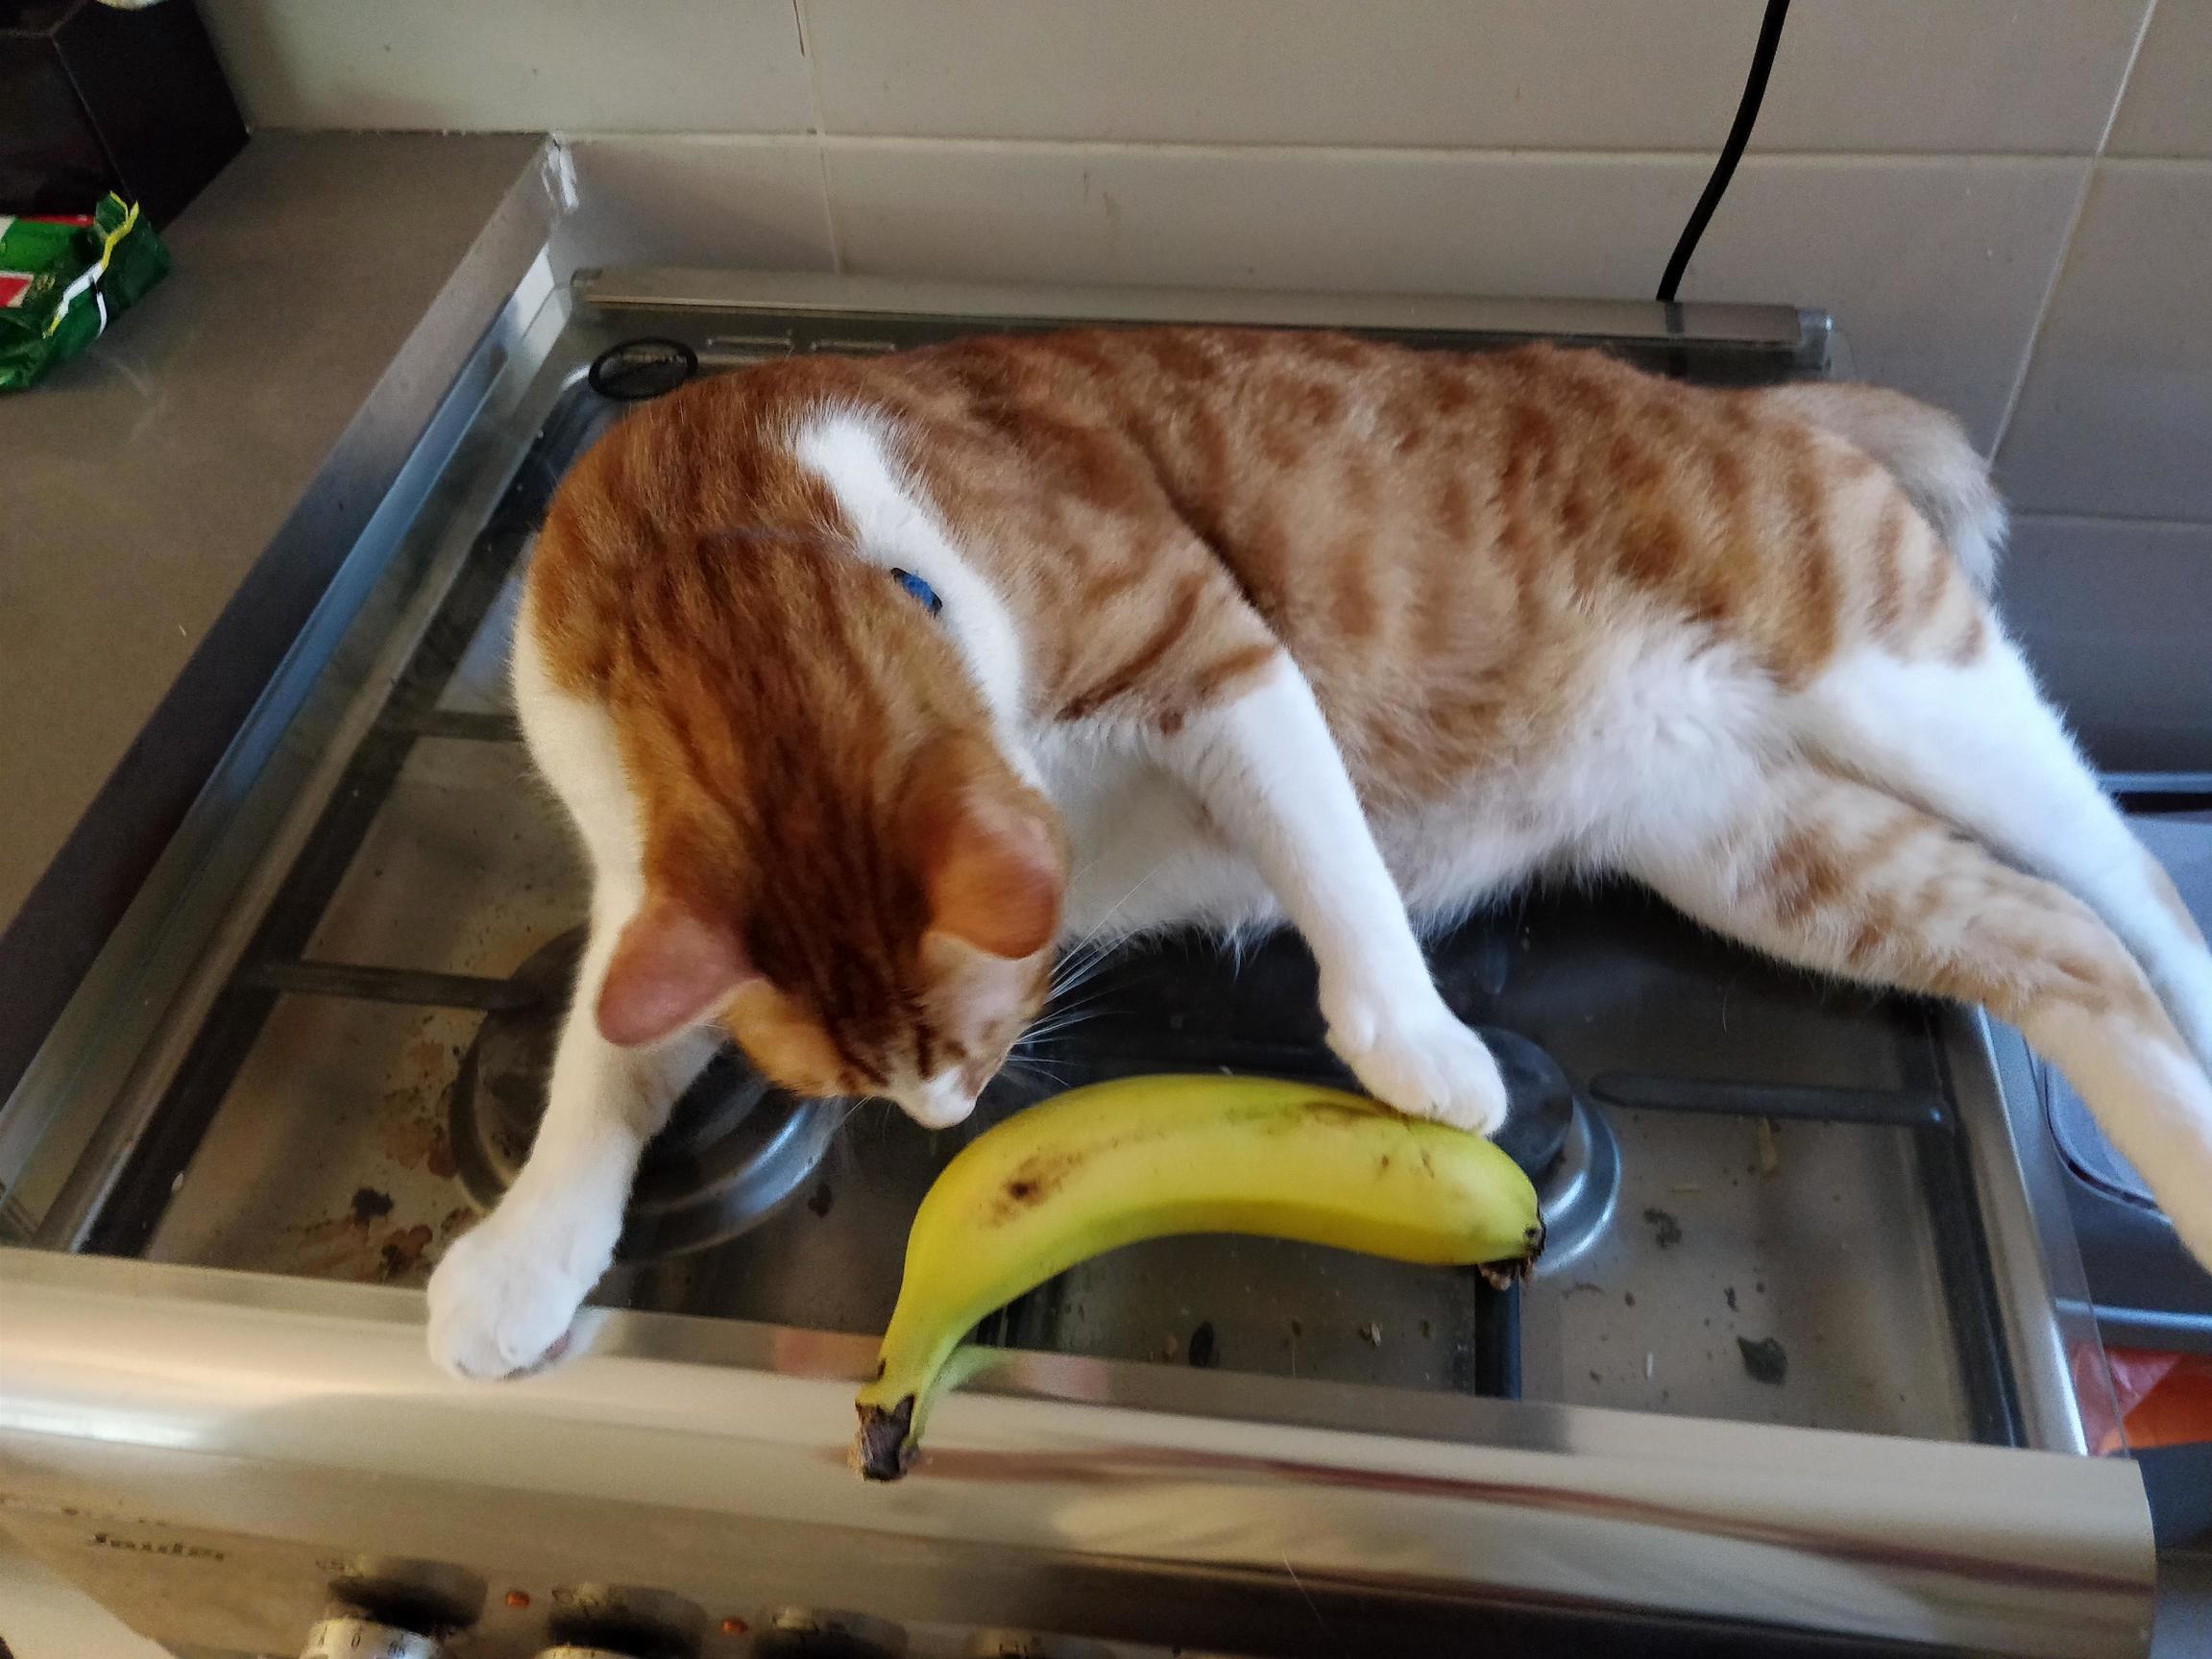 Hobbes our big restless ginger – banana for scale